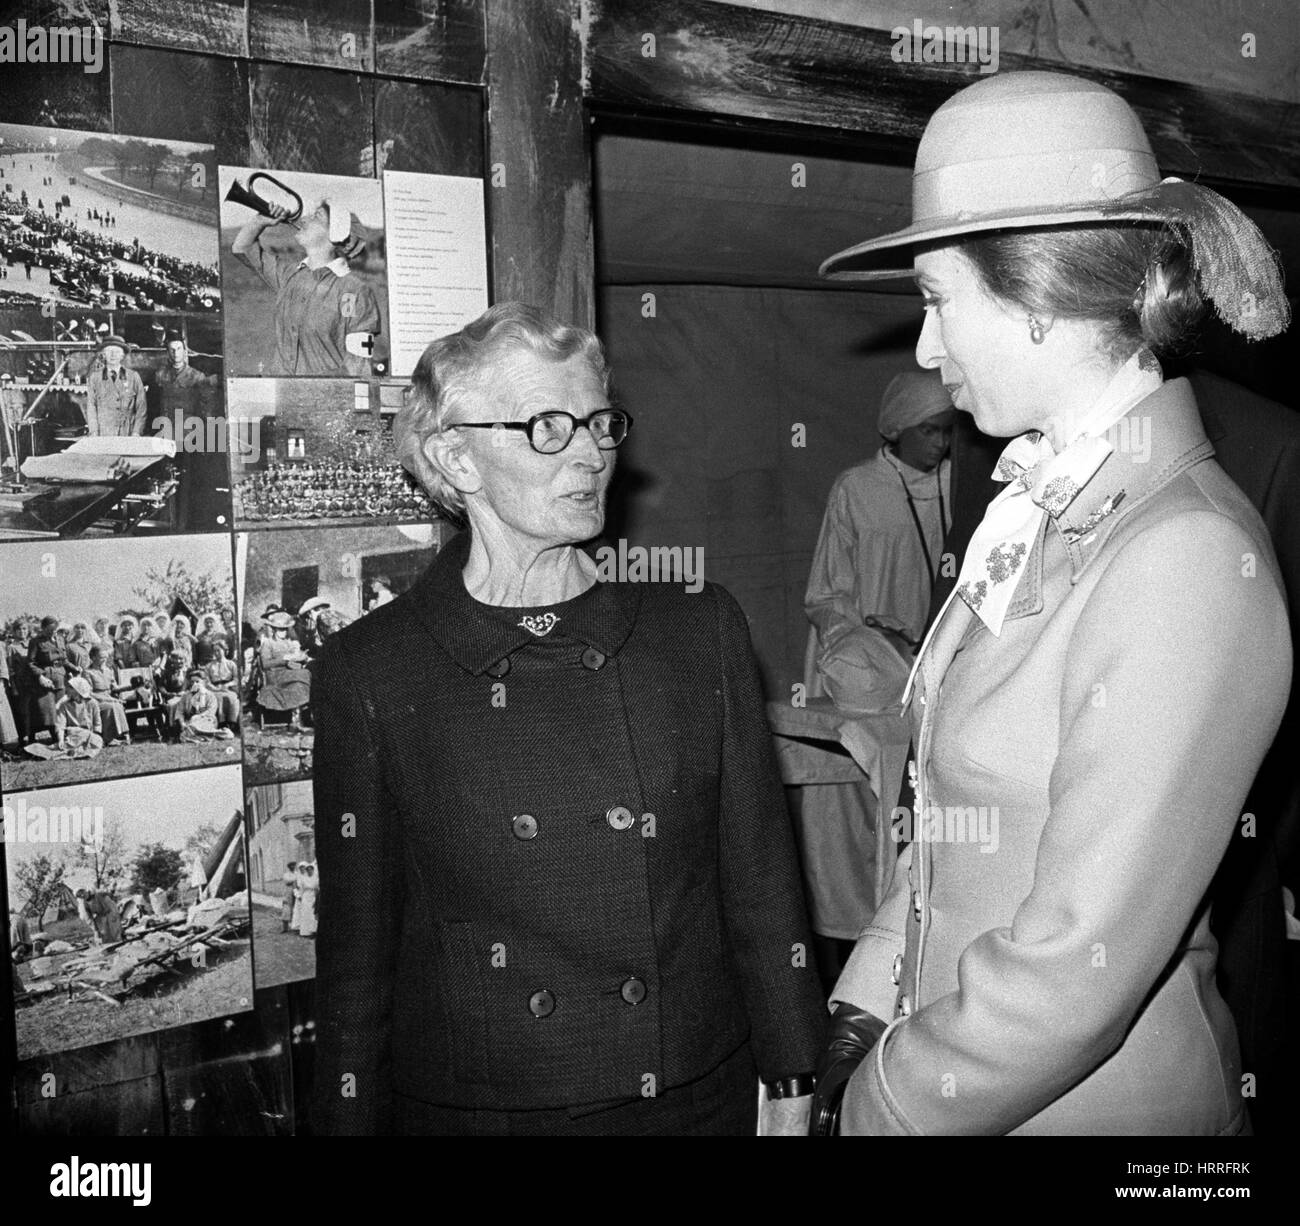 Princess Anne (r), wearing an orange hat and suit, talking with Mairi Chisholm, 81, one of the two 'Women of Pervyse' who set up a field dressing station 200 yards from the front line in Belgium in World War One, at the Imperial War Museum in London. The Princess was opening 'Women at War 1914-18', a special Silver Jubilee Exhibition on the role of women during World War One. Stock Photo